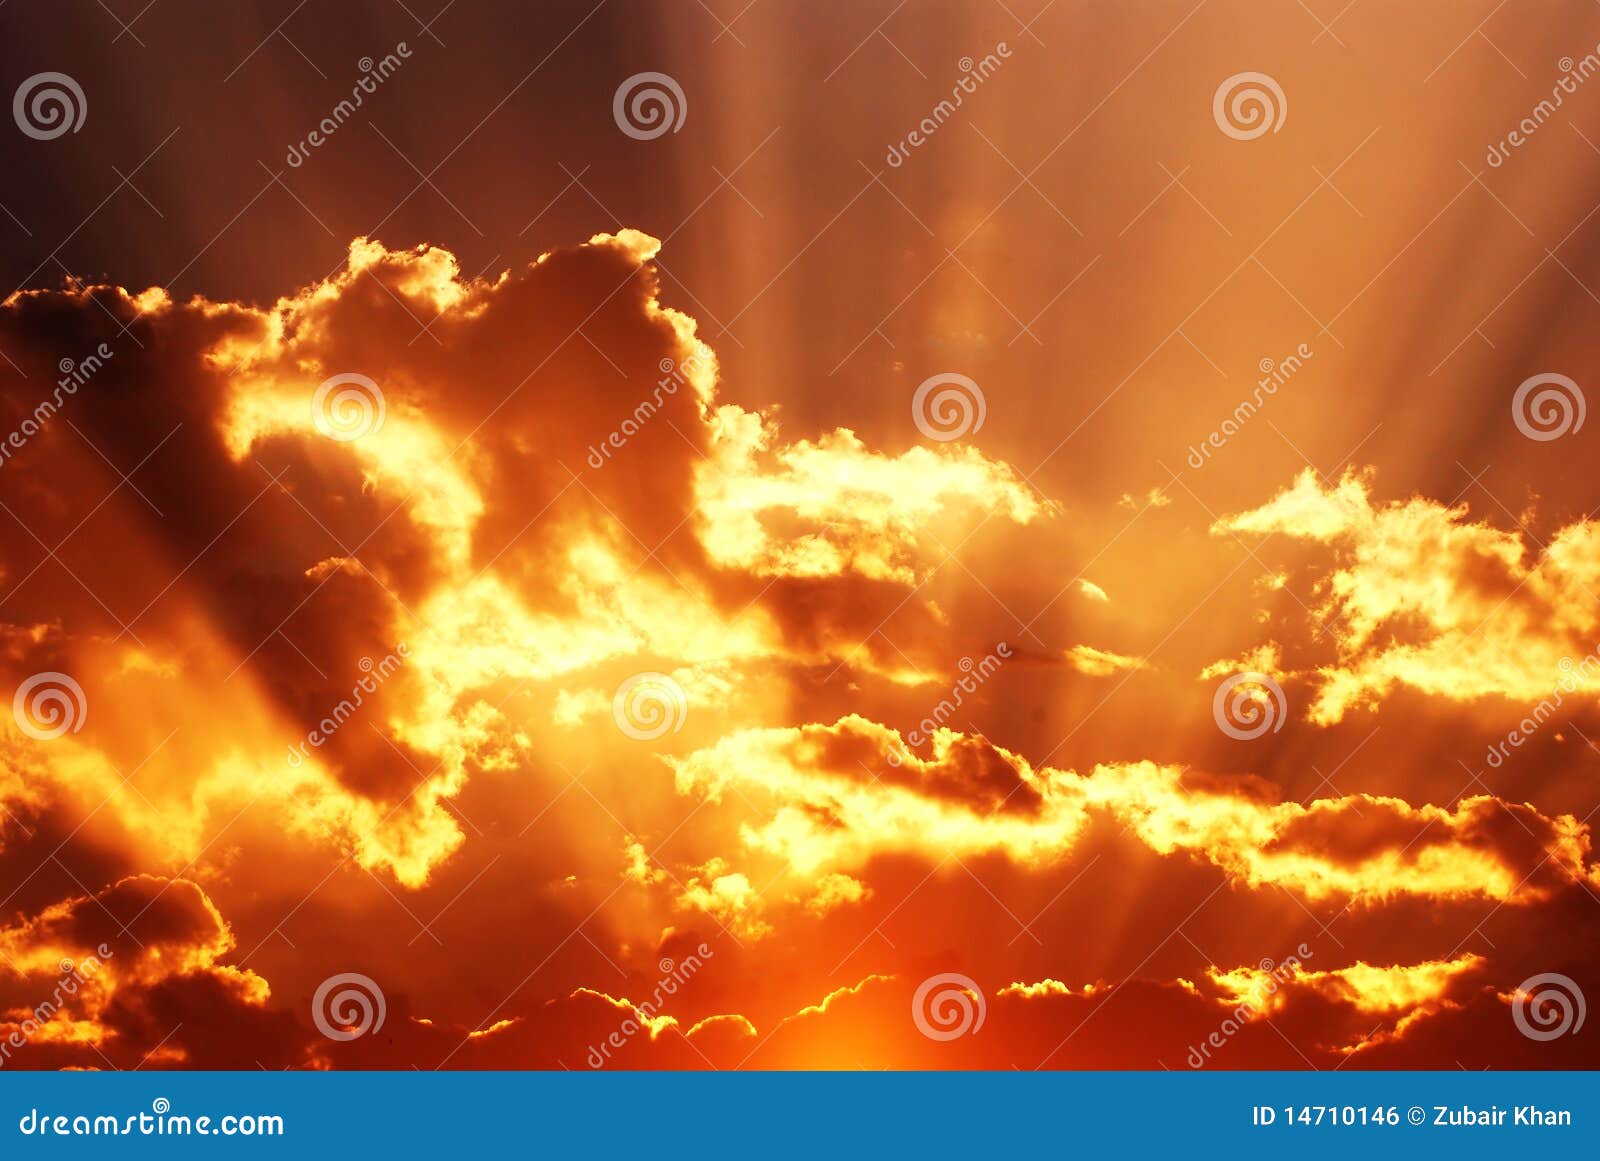 Sunset and cloudscape stock photo. Image of colorful - 14710146